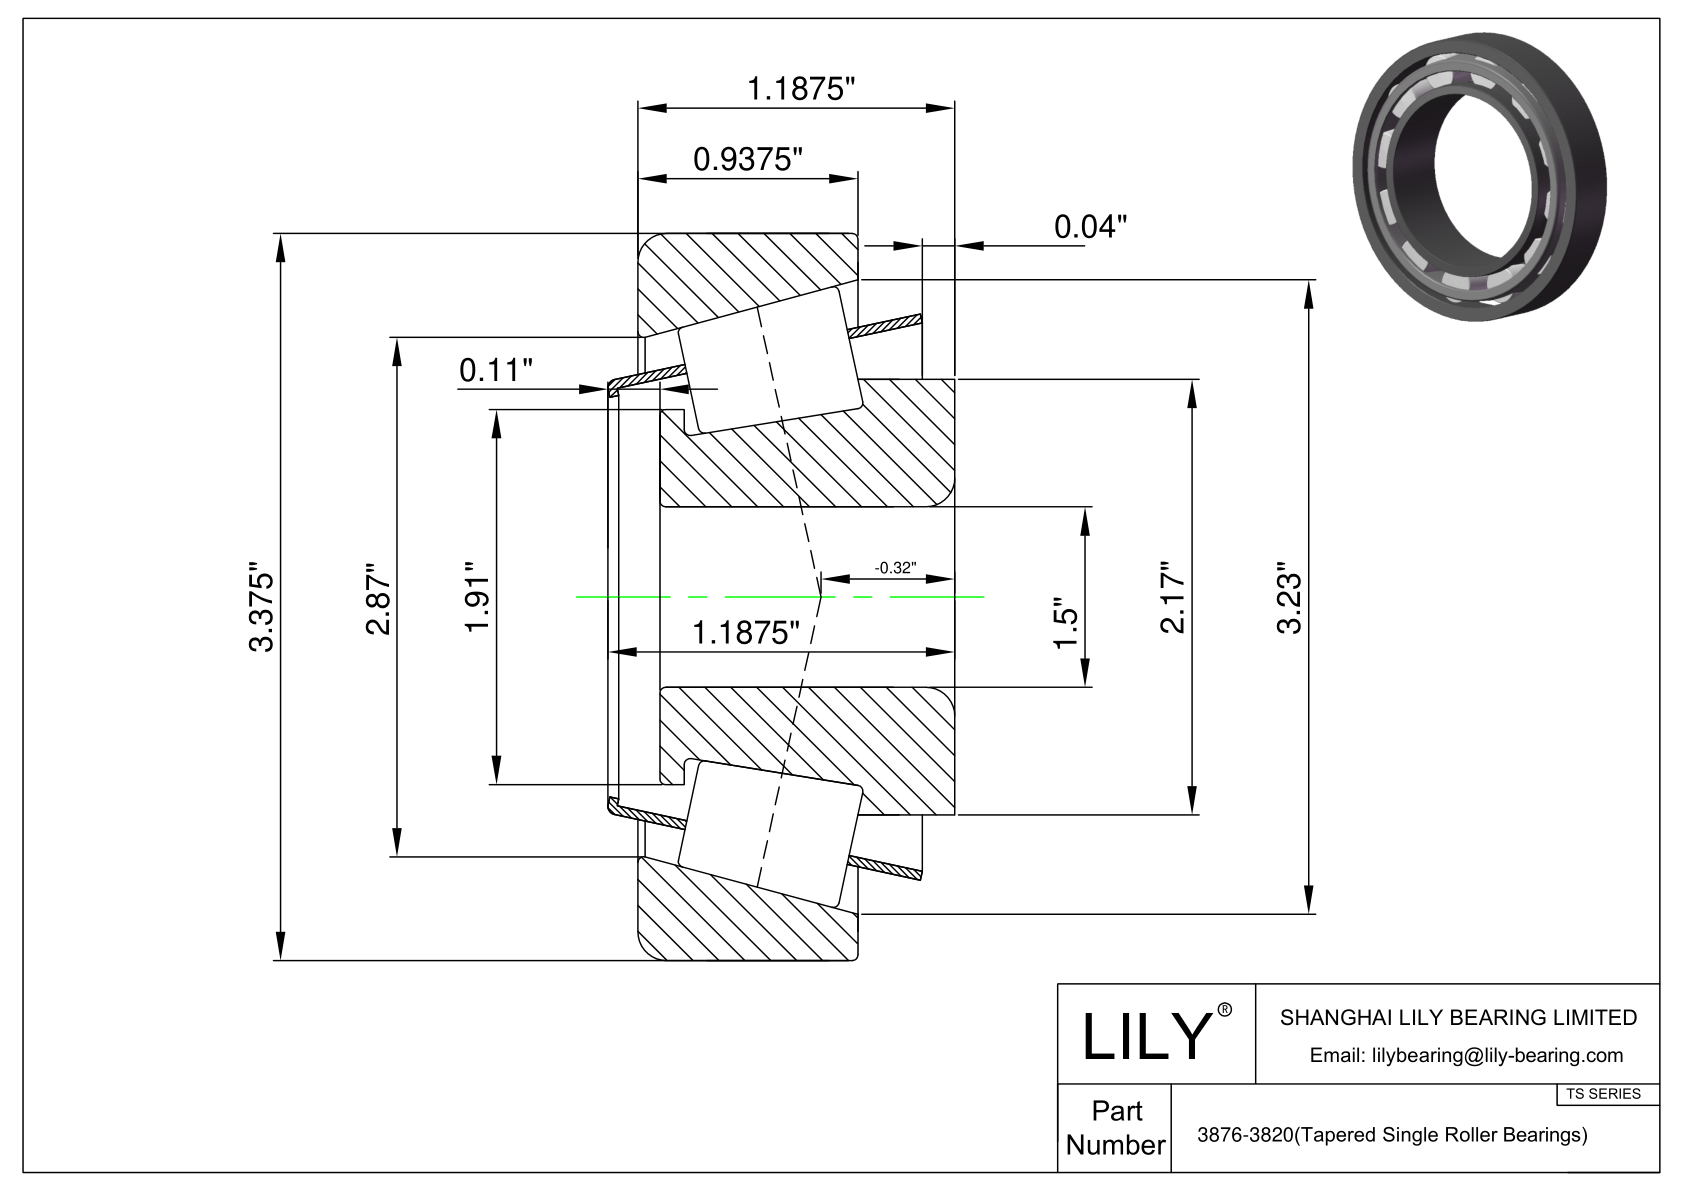 3876-3820 TS (Tapered Single Roller Bearings) (Imperial) cad drawing